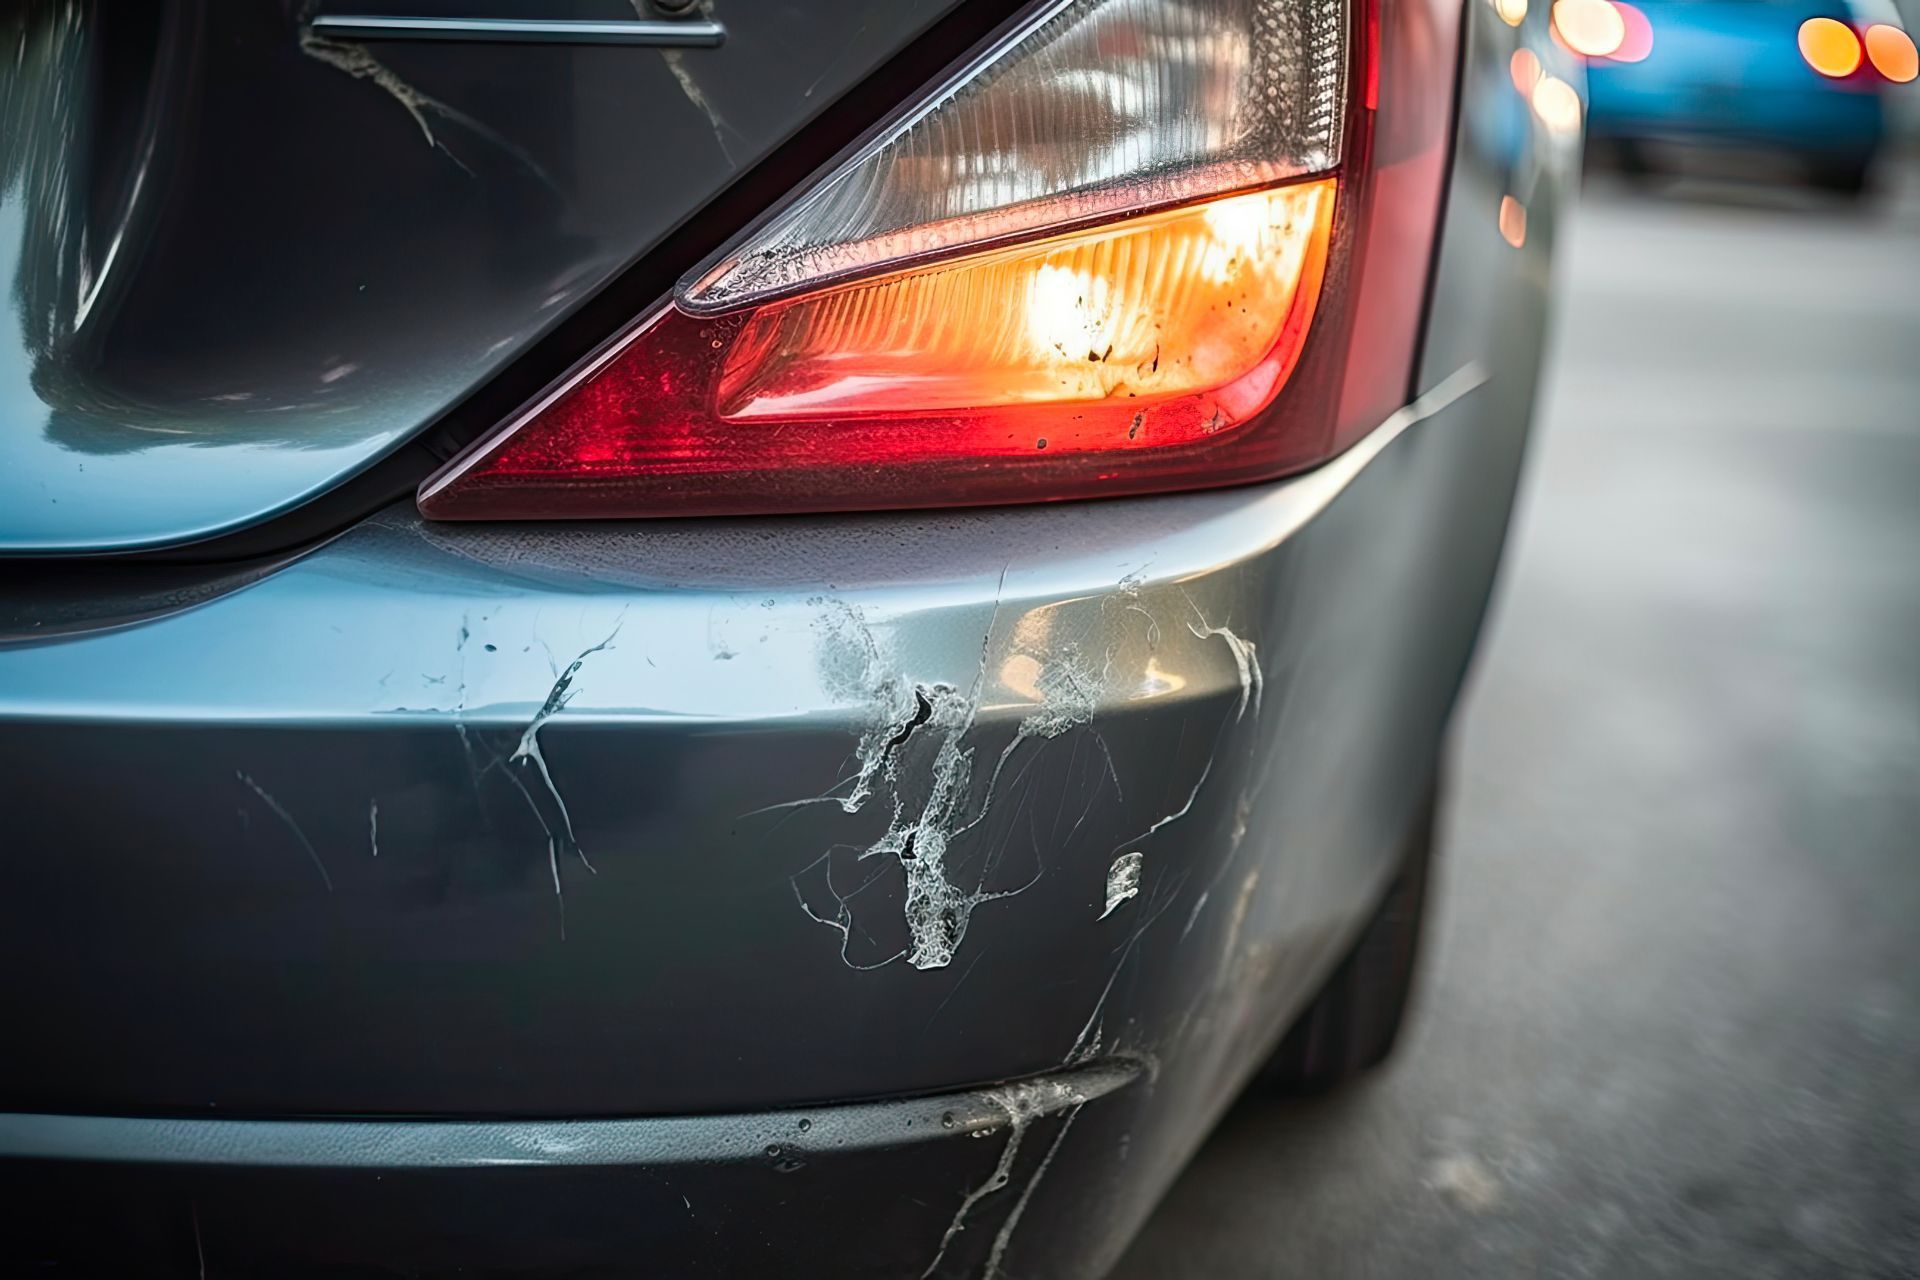 Reasons To Replace Your Car's Bumper After an Accident